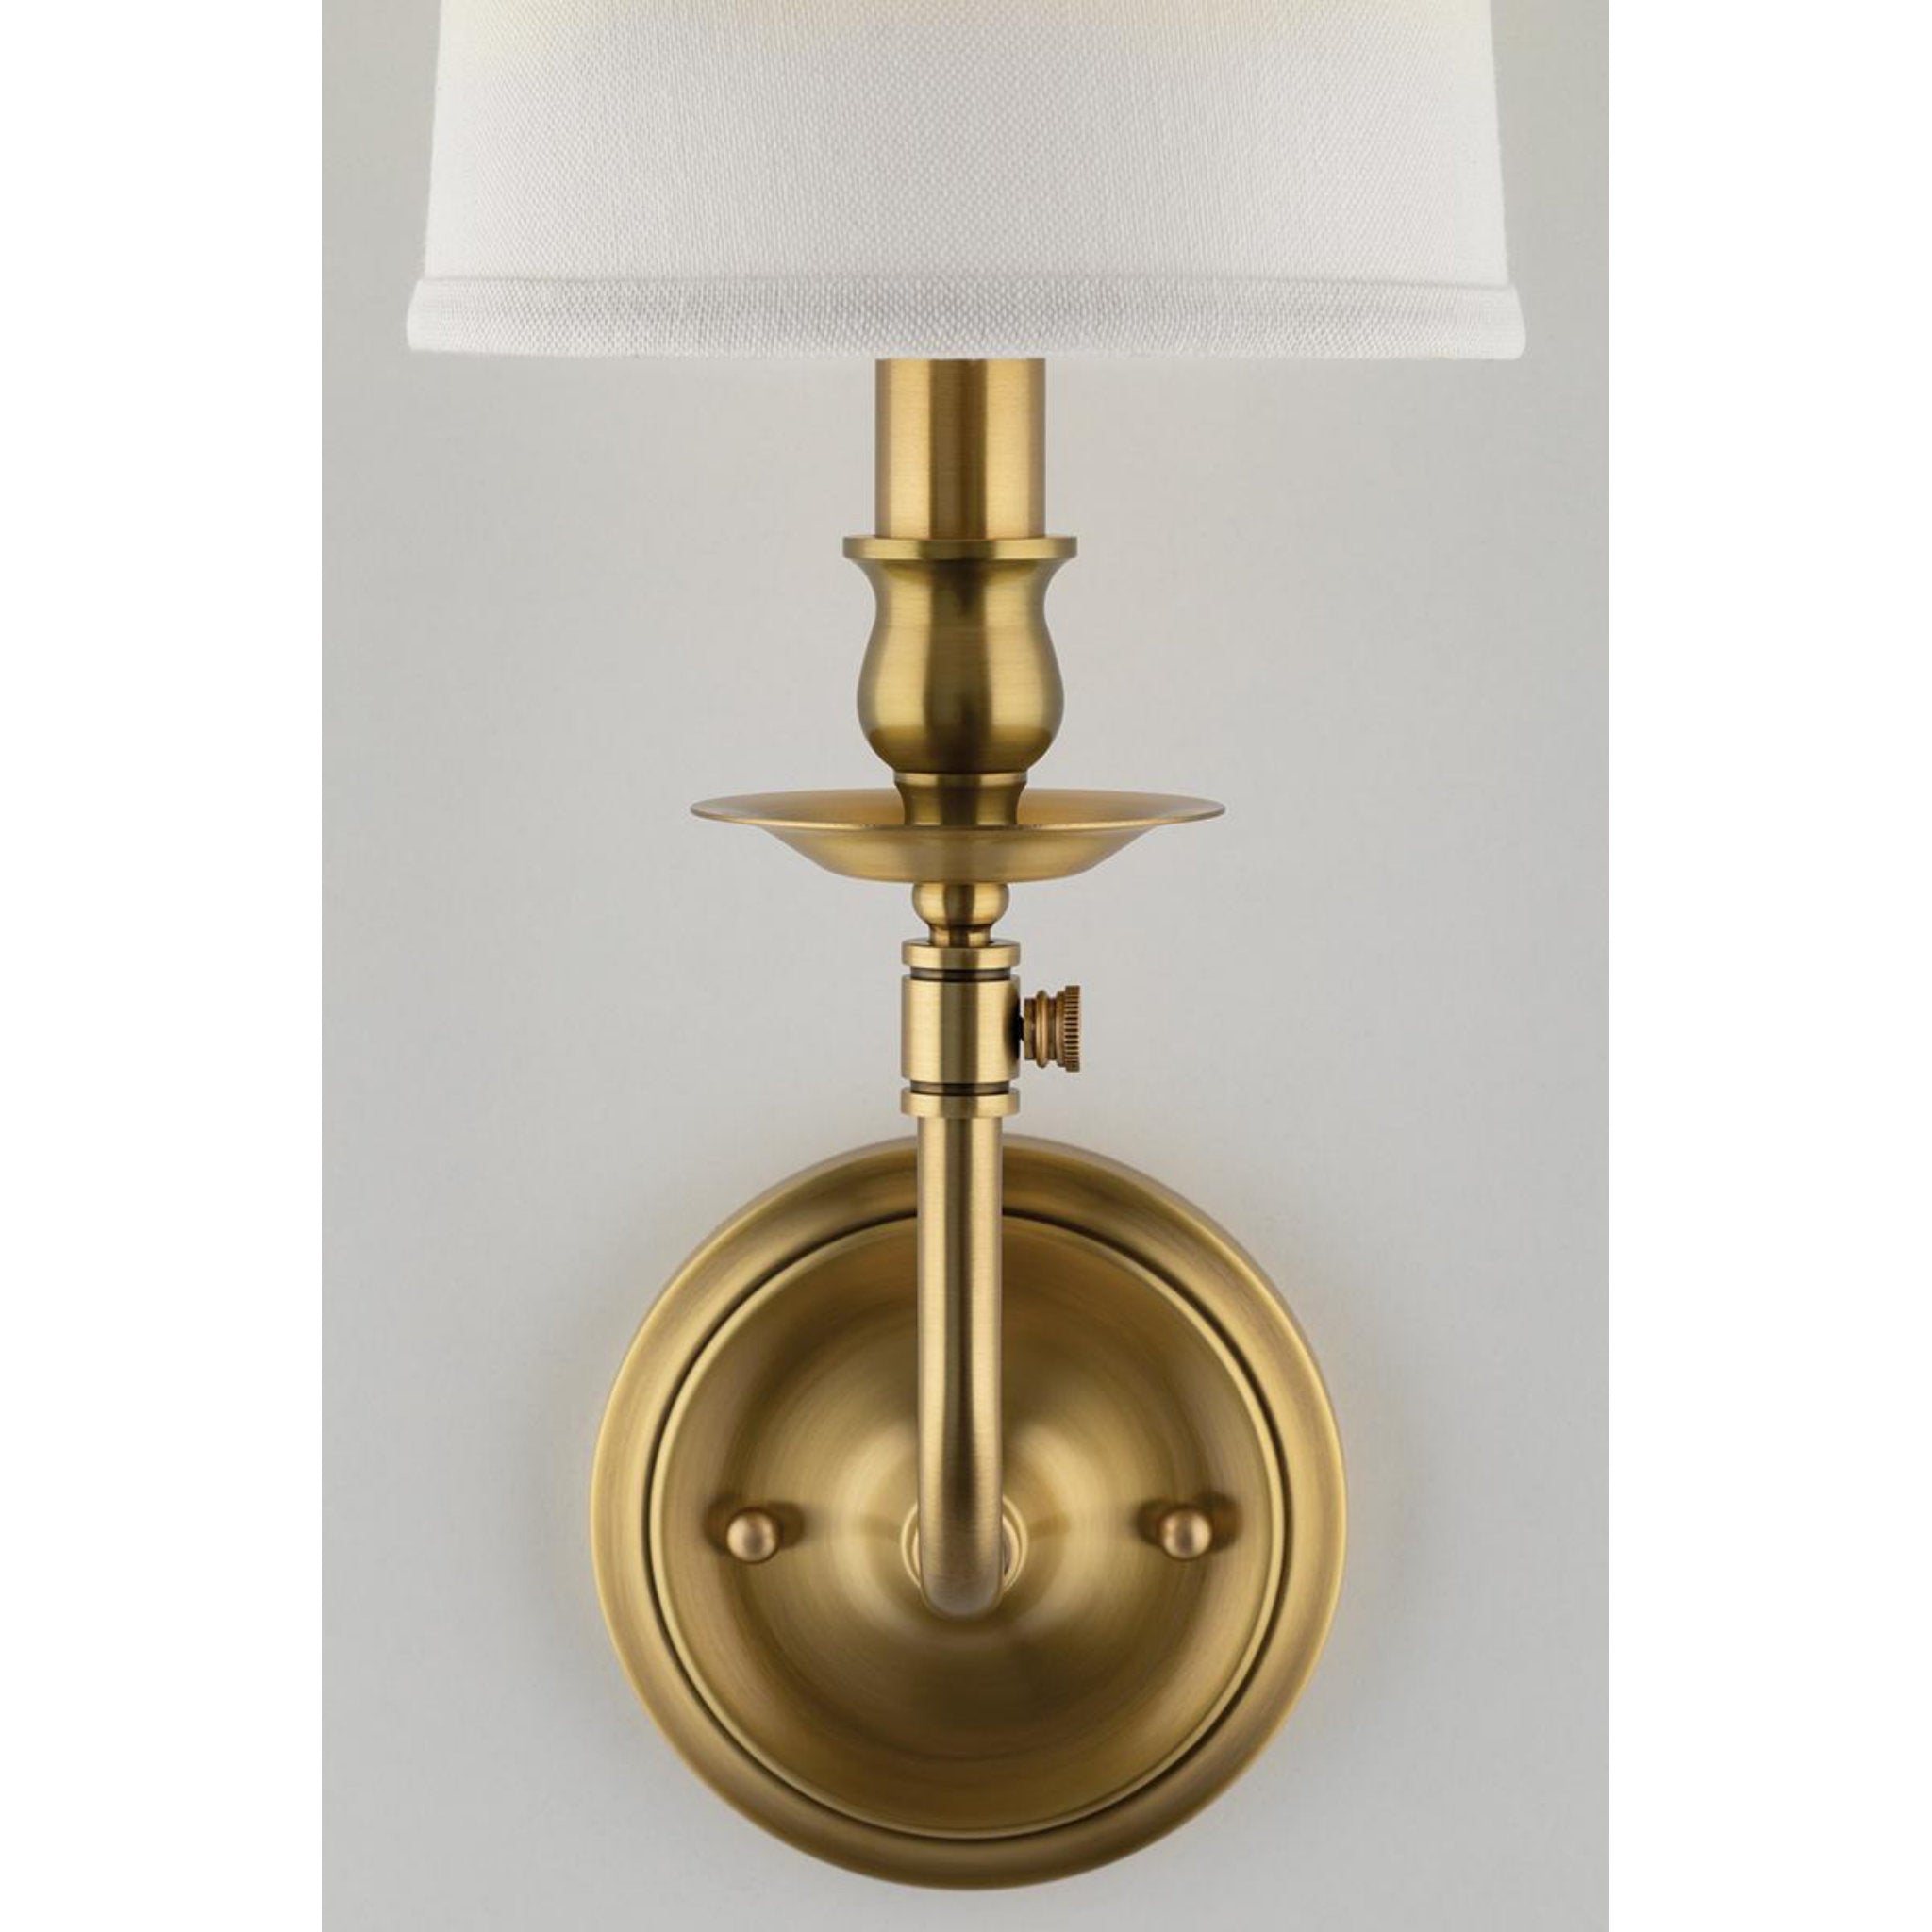 Logan 2 Light Wall Sconce in Polished Nickel